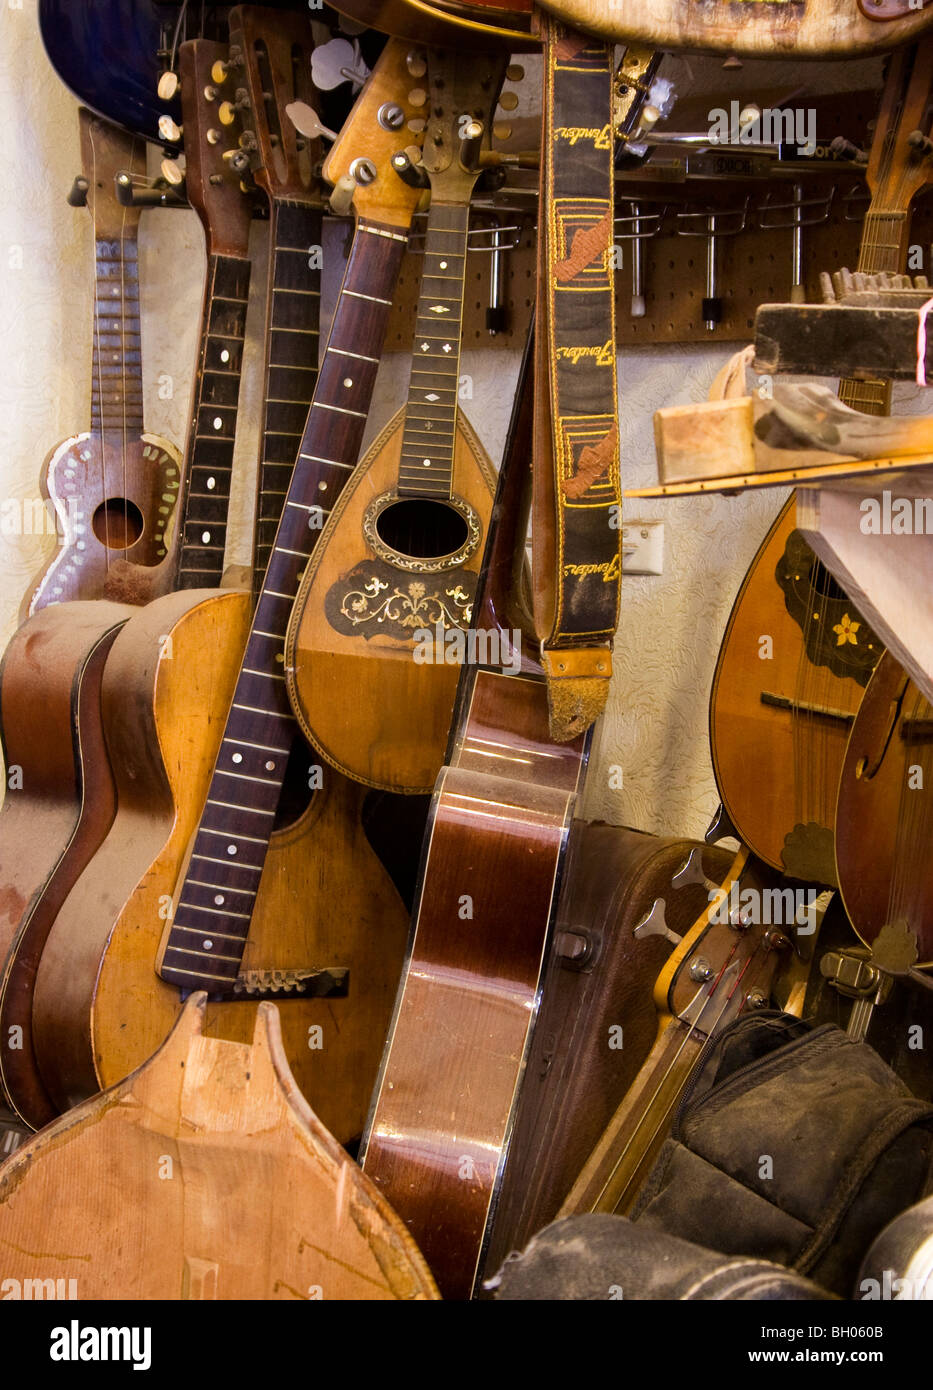 Stringed instruments lined up in a luthier's shop, waiting to be repaired. Stock Photo